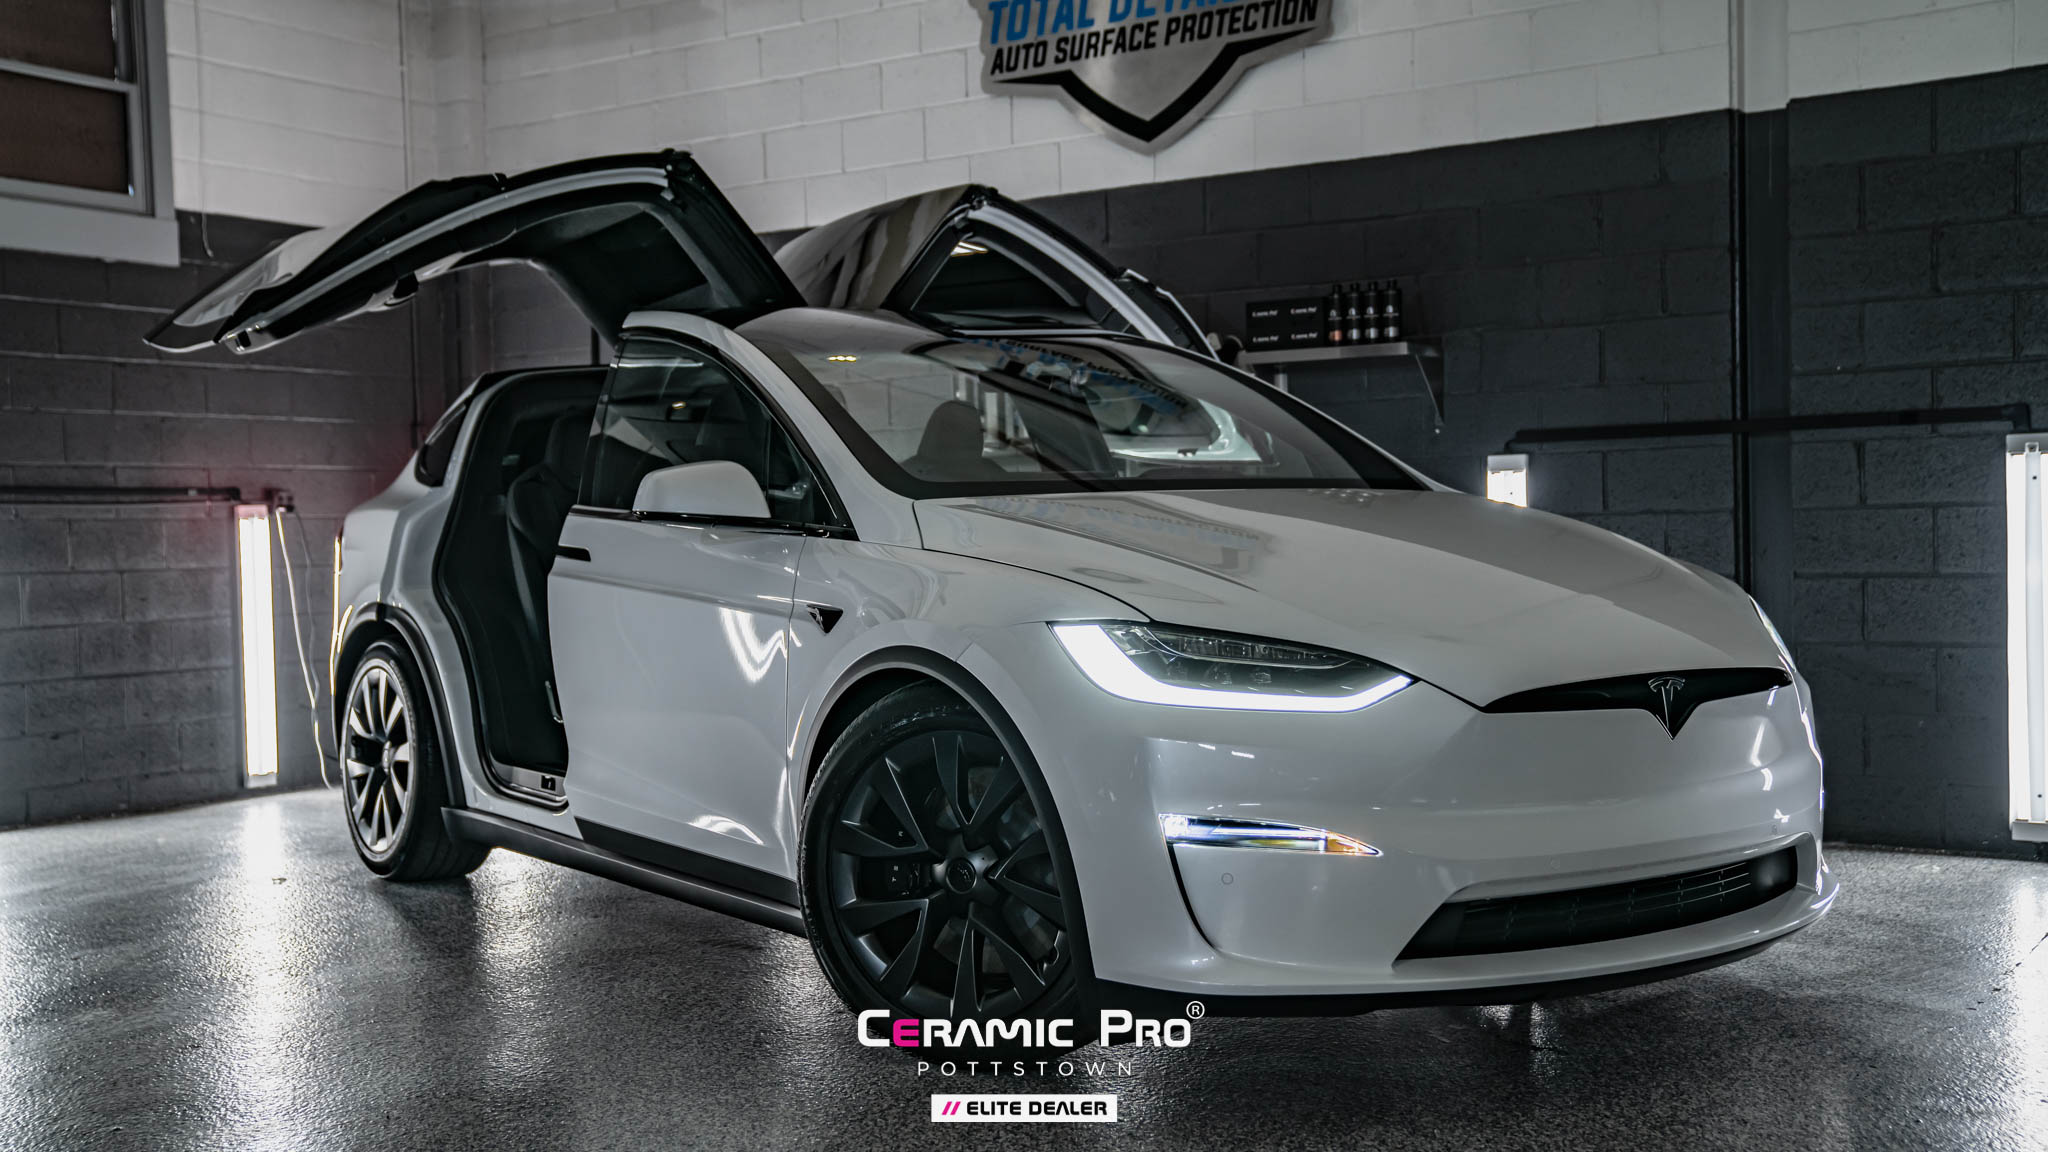 Tesla Owners Protect your investment With Ceramic Coating